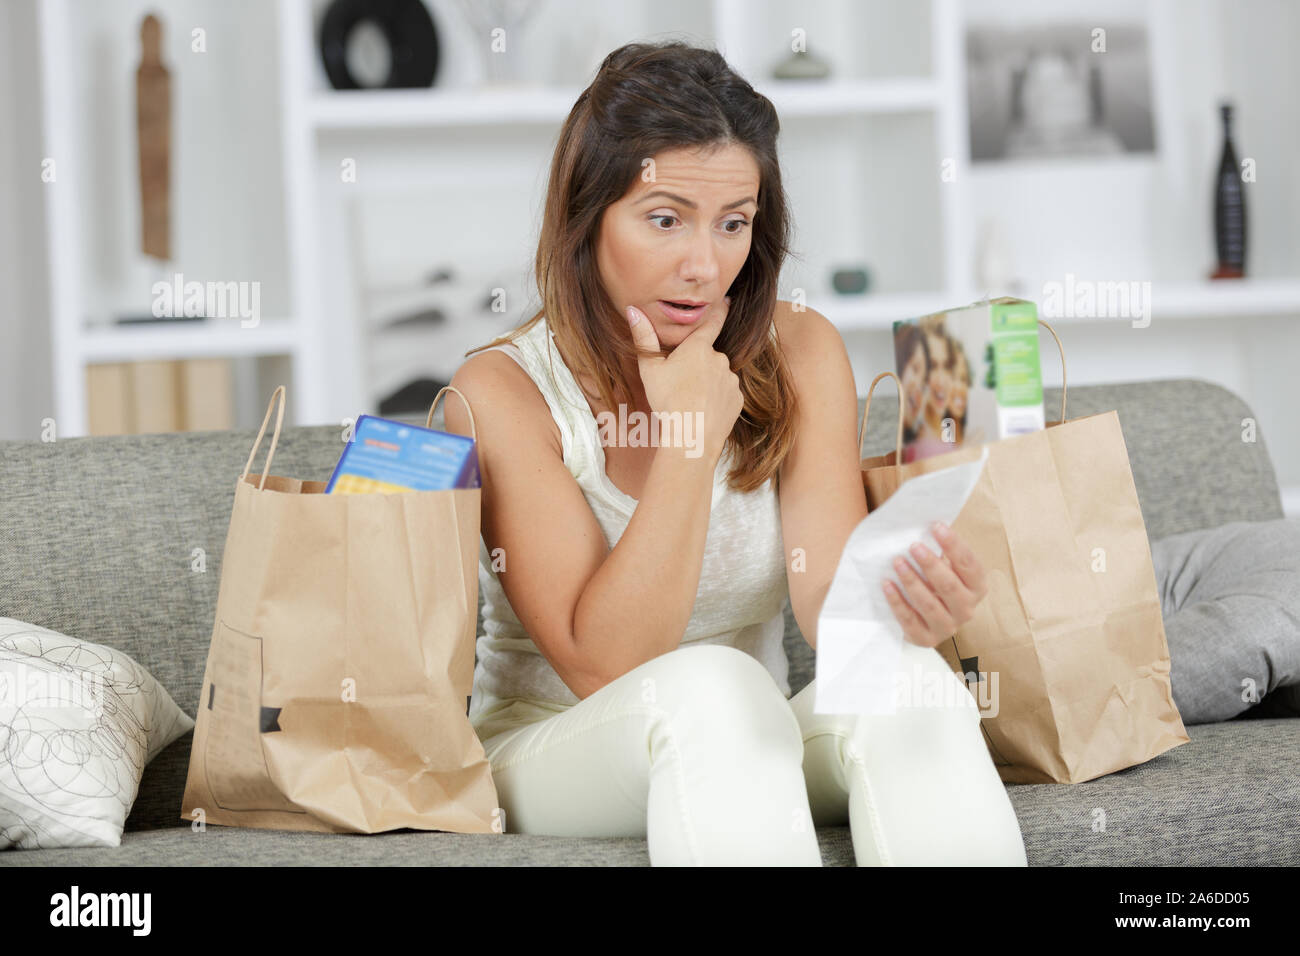 shocked woman after shopping at the supermarket Stock Photo